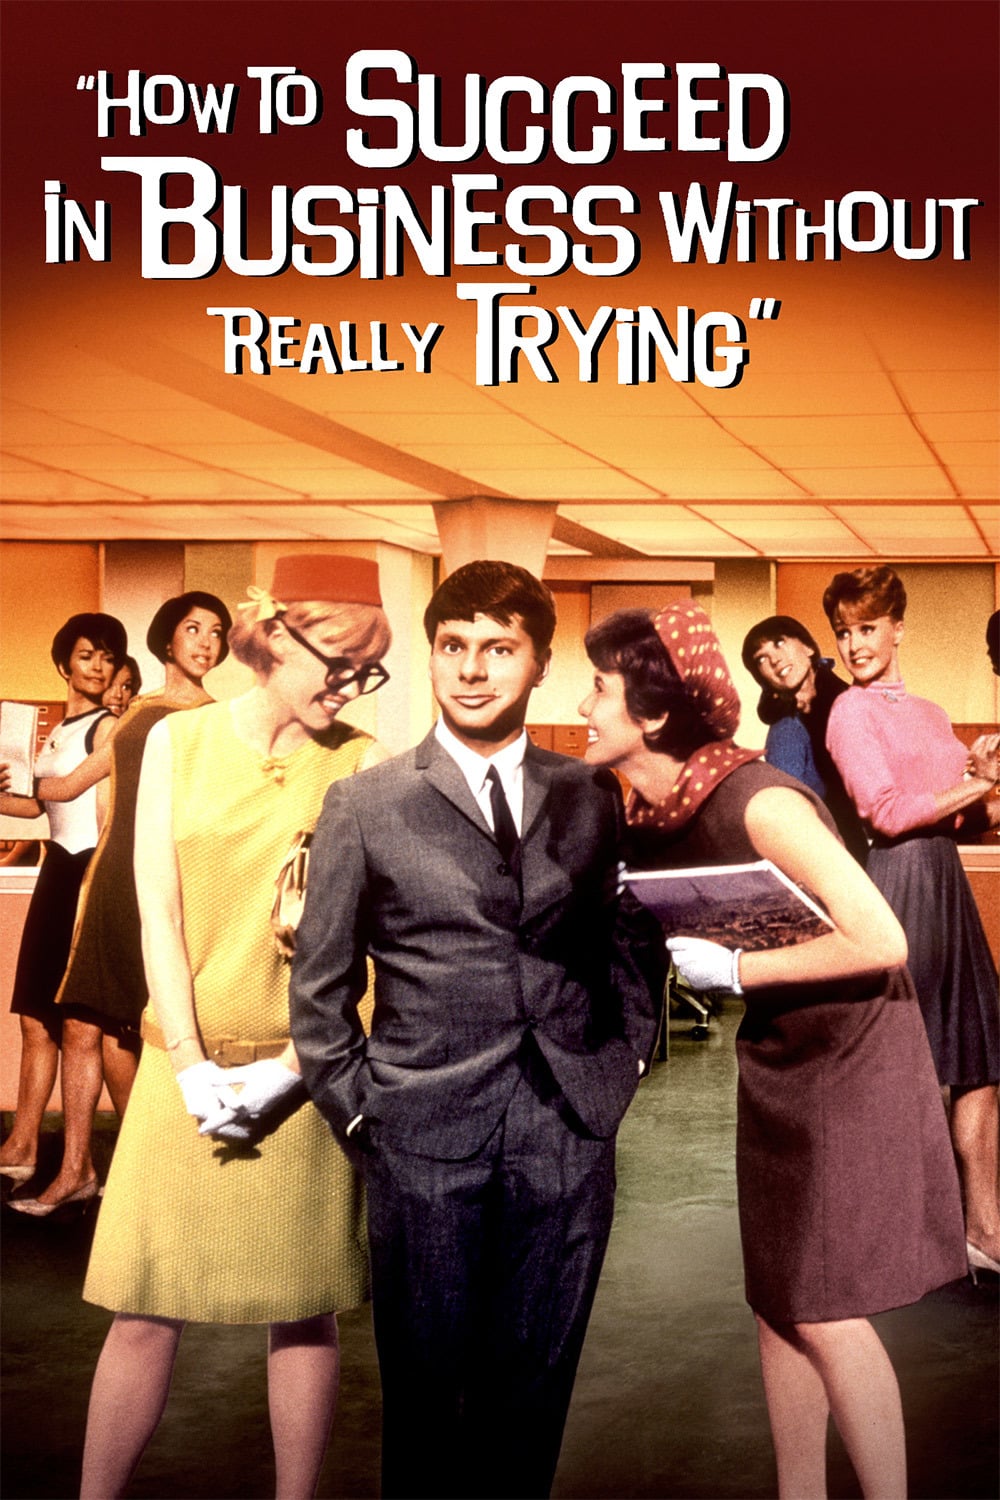 Poster for the movie "How to Succeed in Business Without Really Trying"